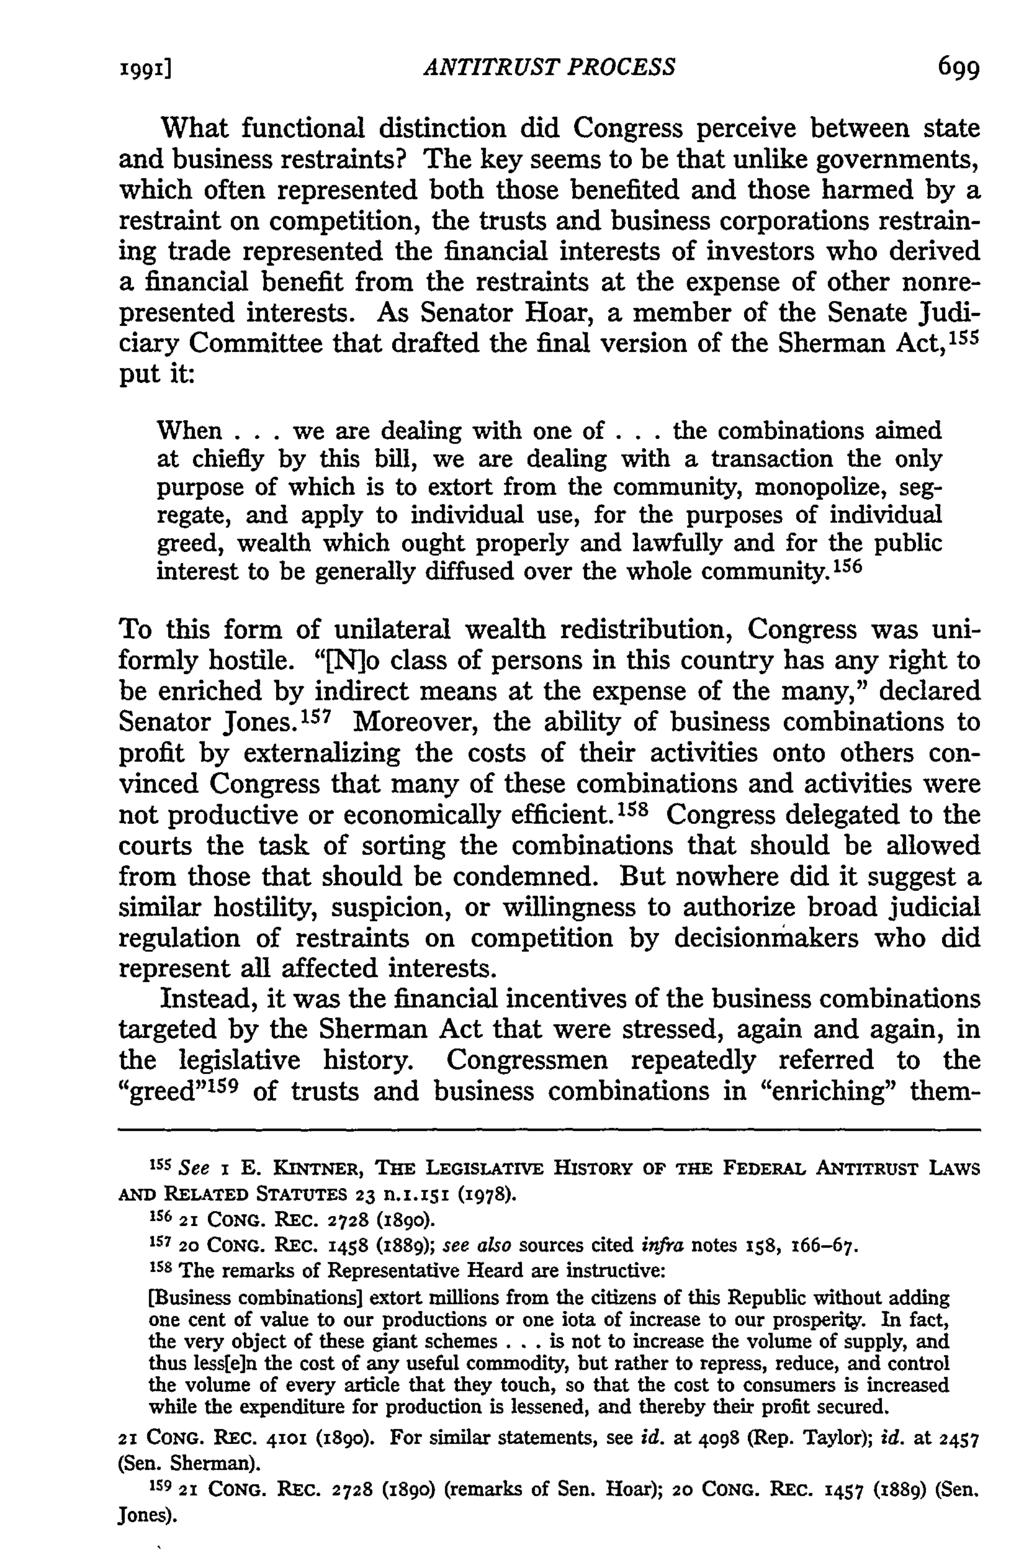 1991] ANTITRUST PROCESS 6gg What functional distinction did Congress perceive between state and business restraints?